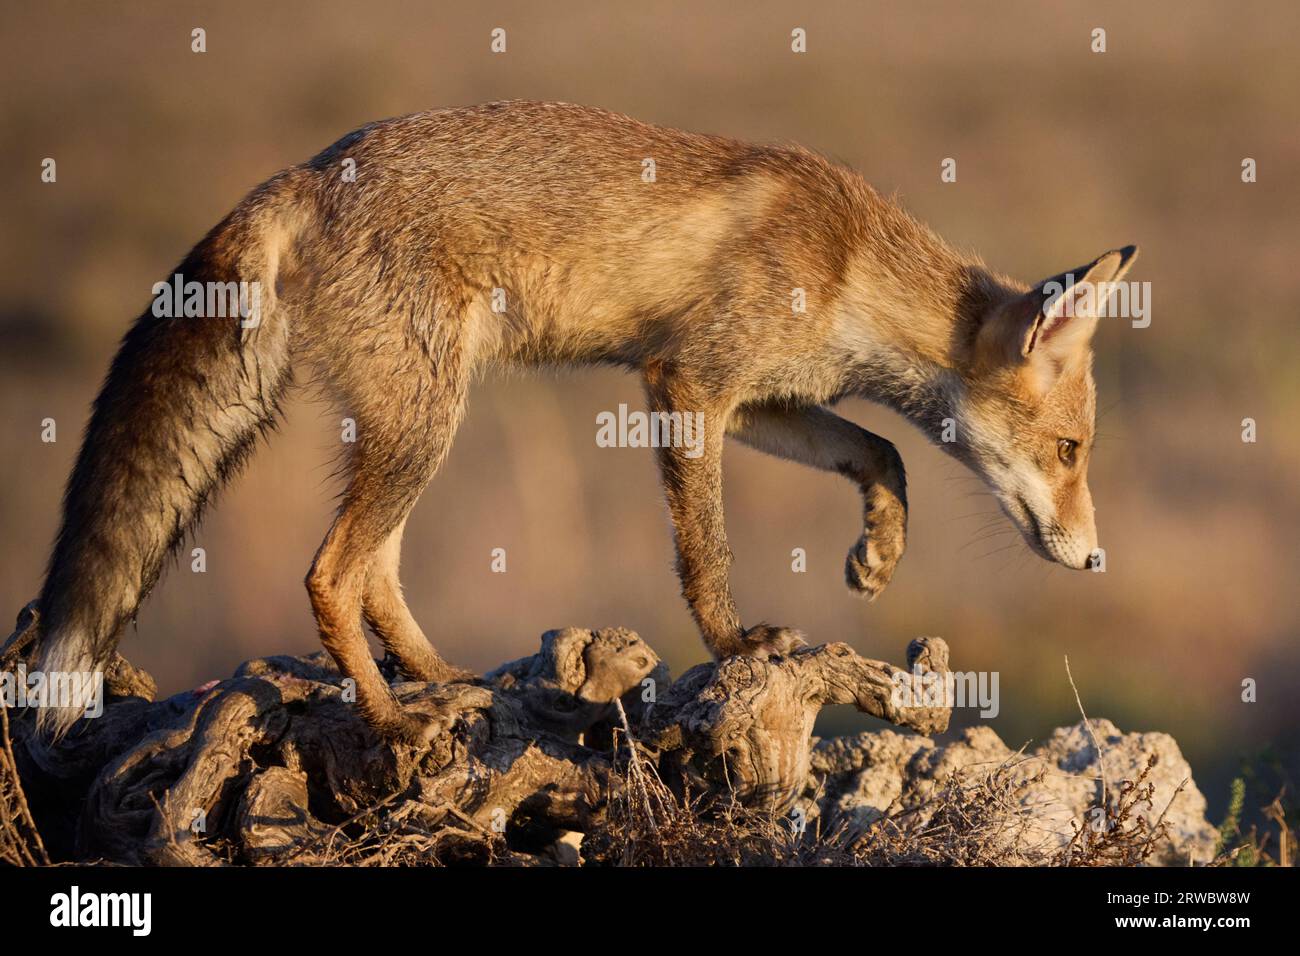 Wild Vulpes Vulpes fox with brown fur walking in forest and looking down against blurred background Stock Photo